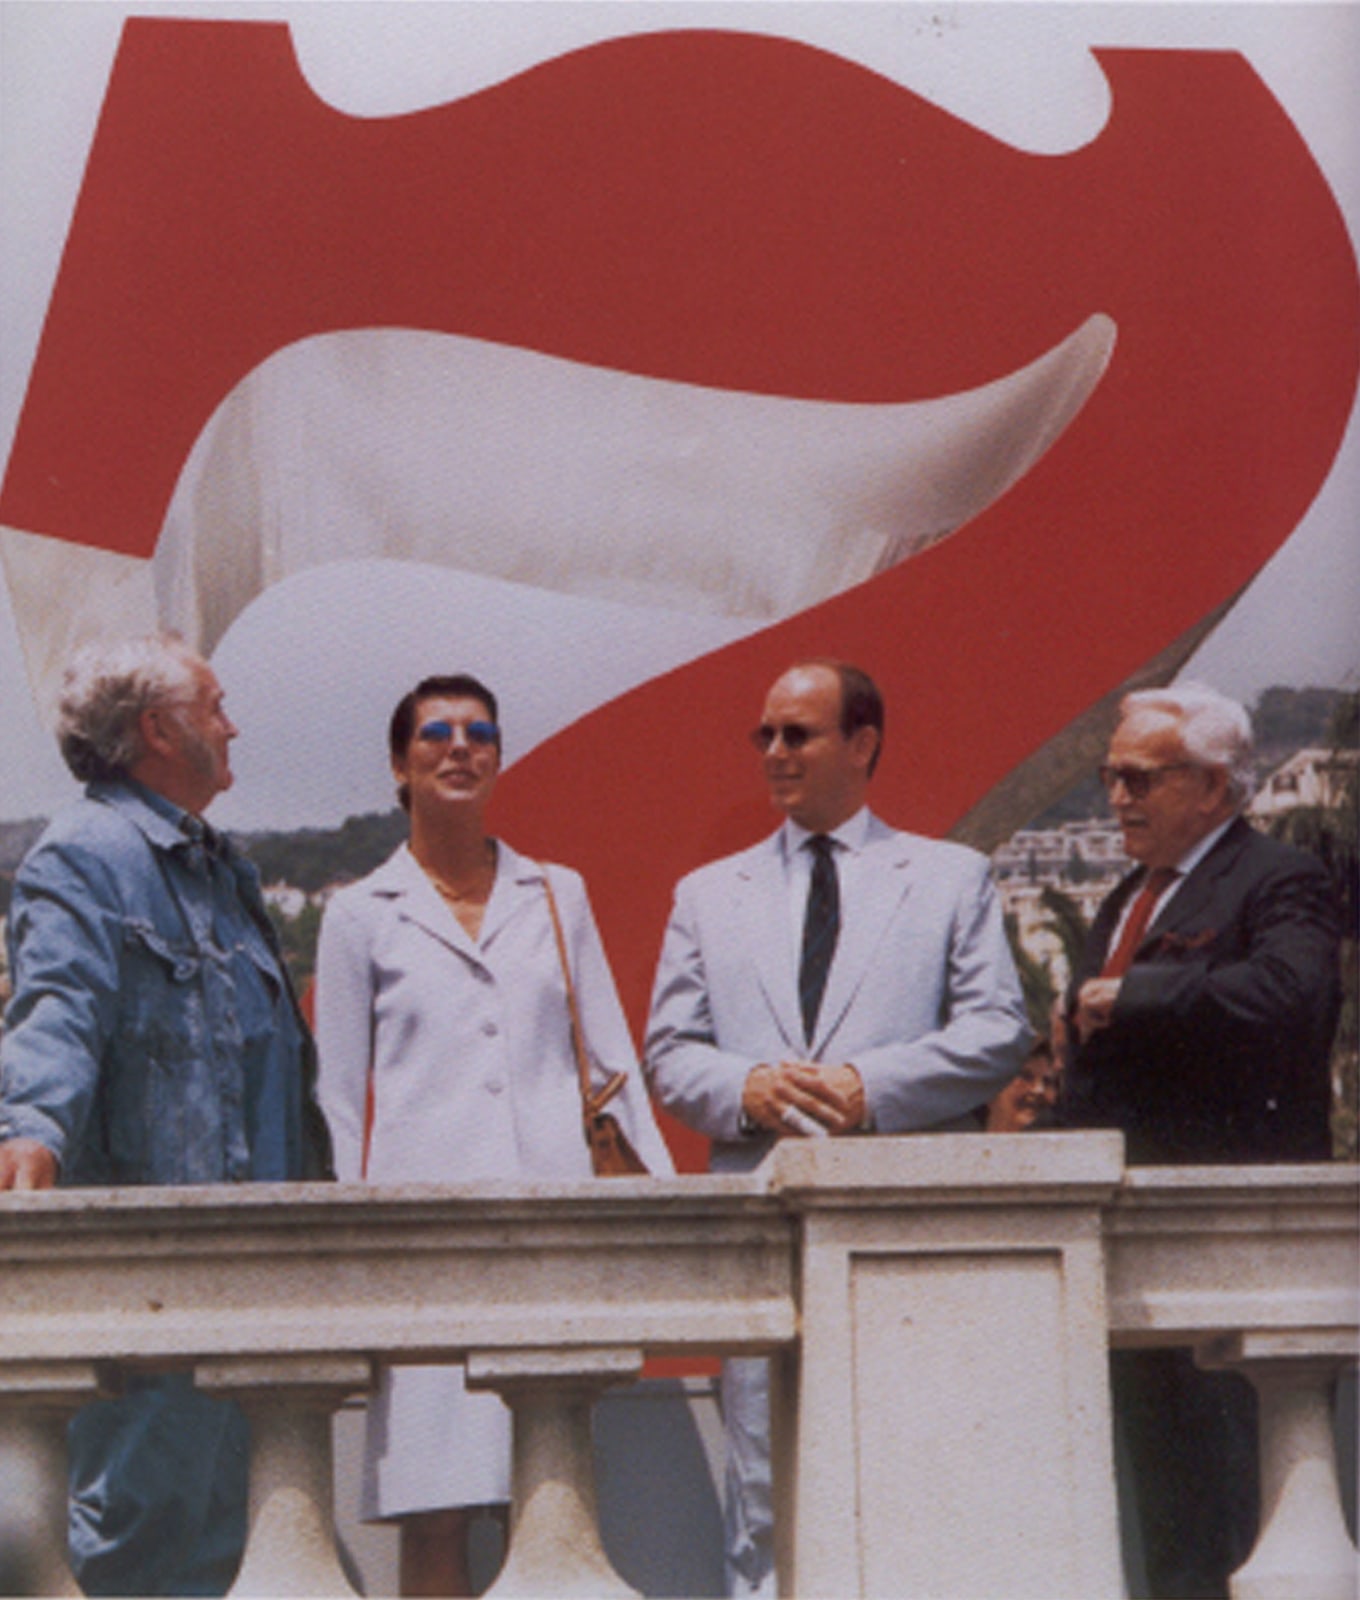 Left to right: Indiana, Princess Stephanie of Monaco, Prince Albert II of Monaco, and Prince Rainier III of Monaco, in front of Indiana&amp;rsquo;s sculpture Seven (1980) in Monte Carlo, 1997. Image courtesy of Star of Hope Foundation, Vinalhaven, Maine